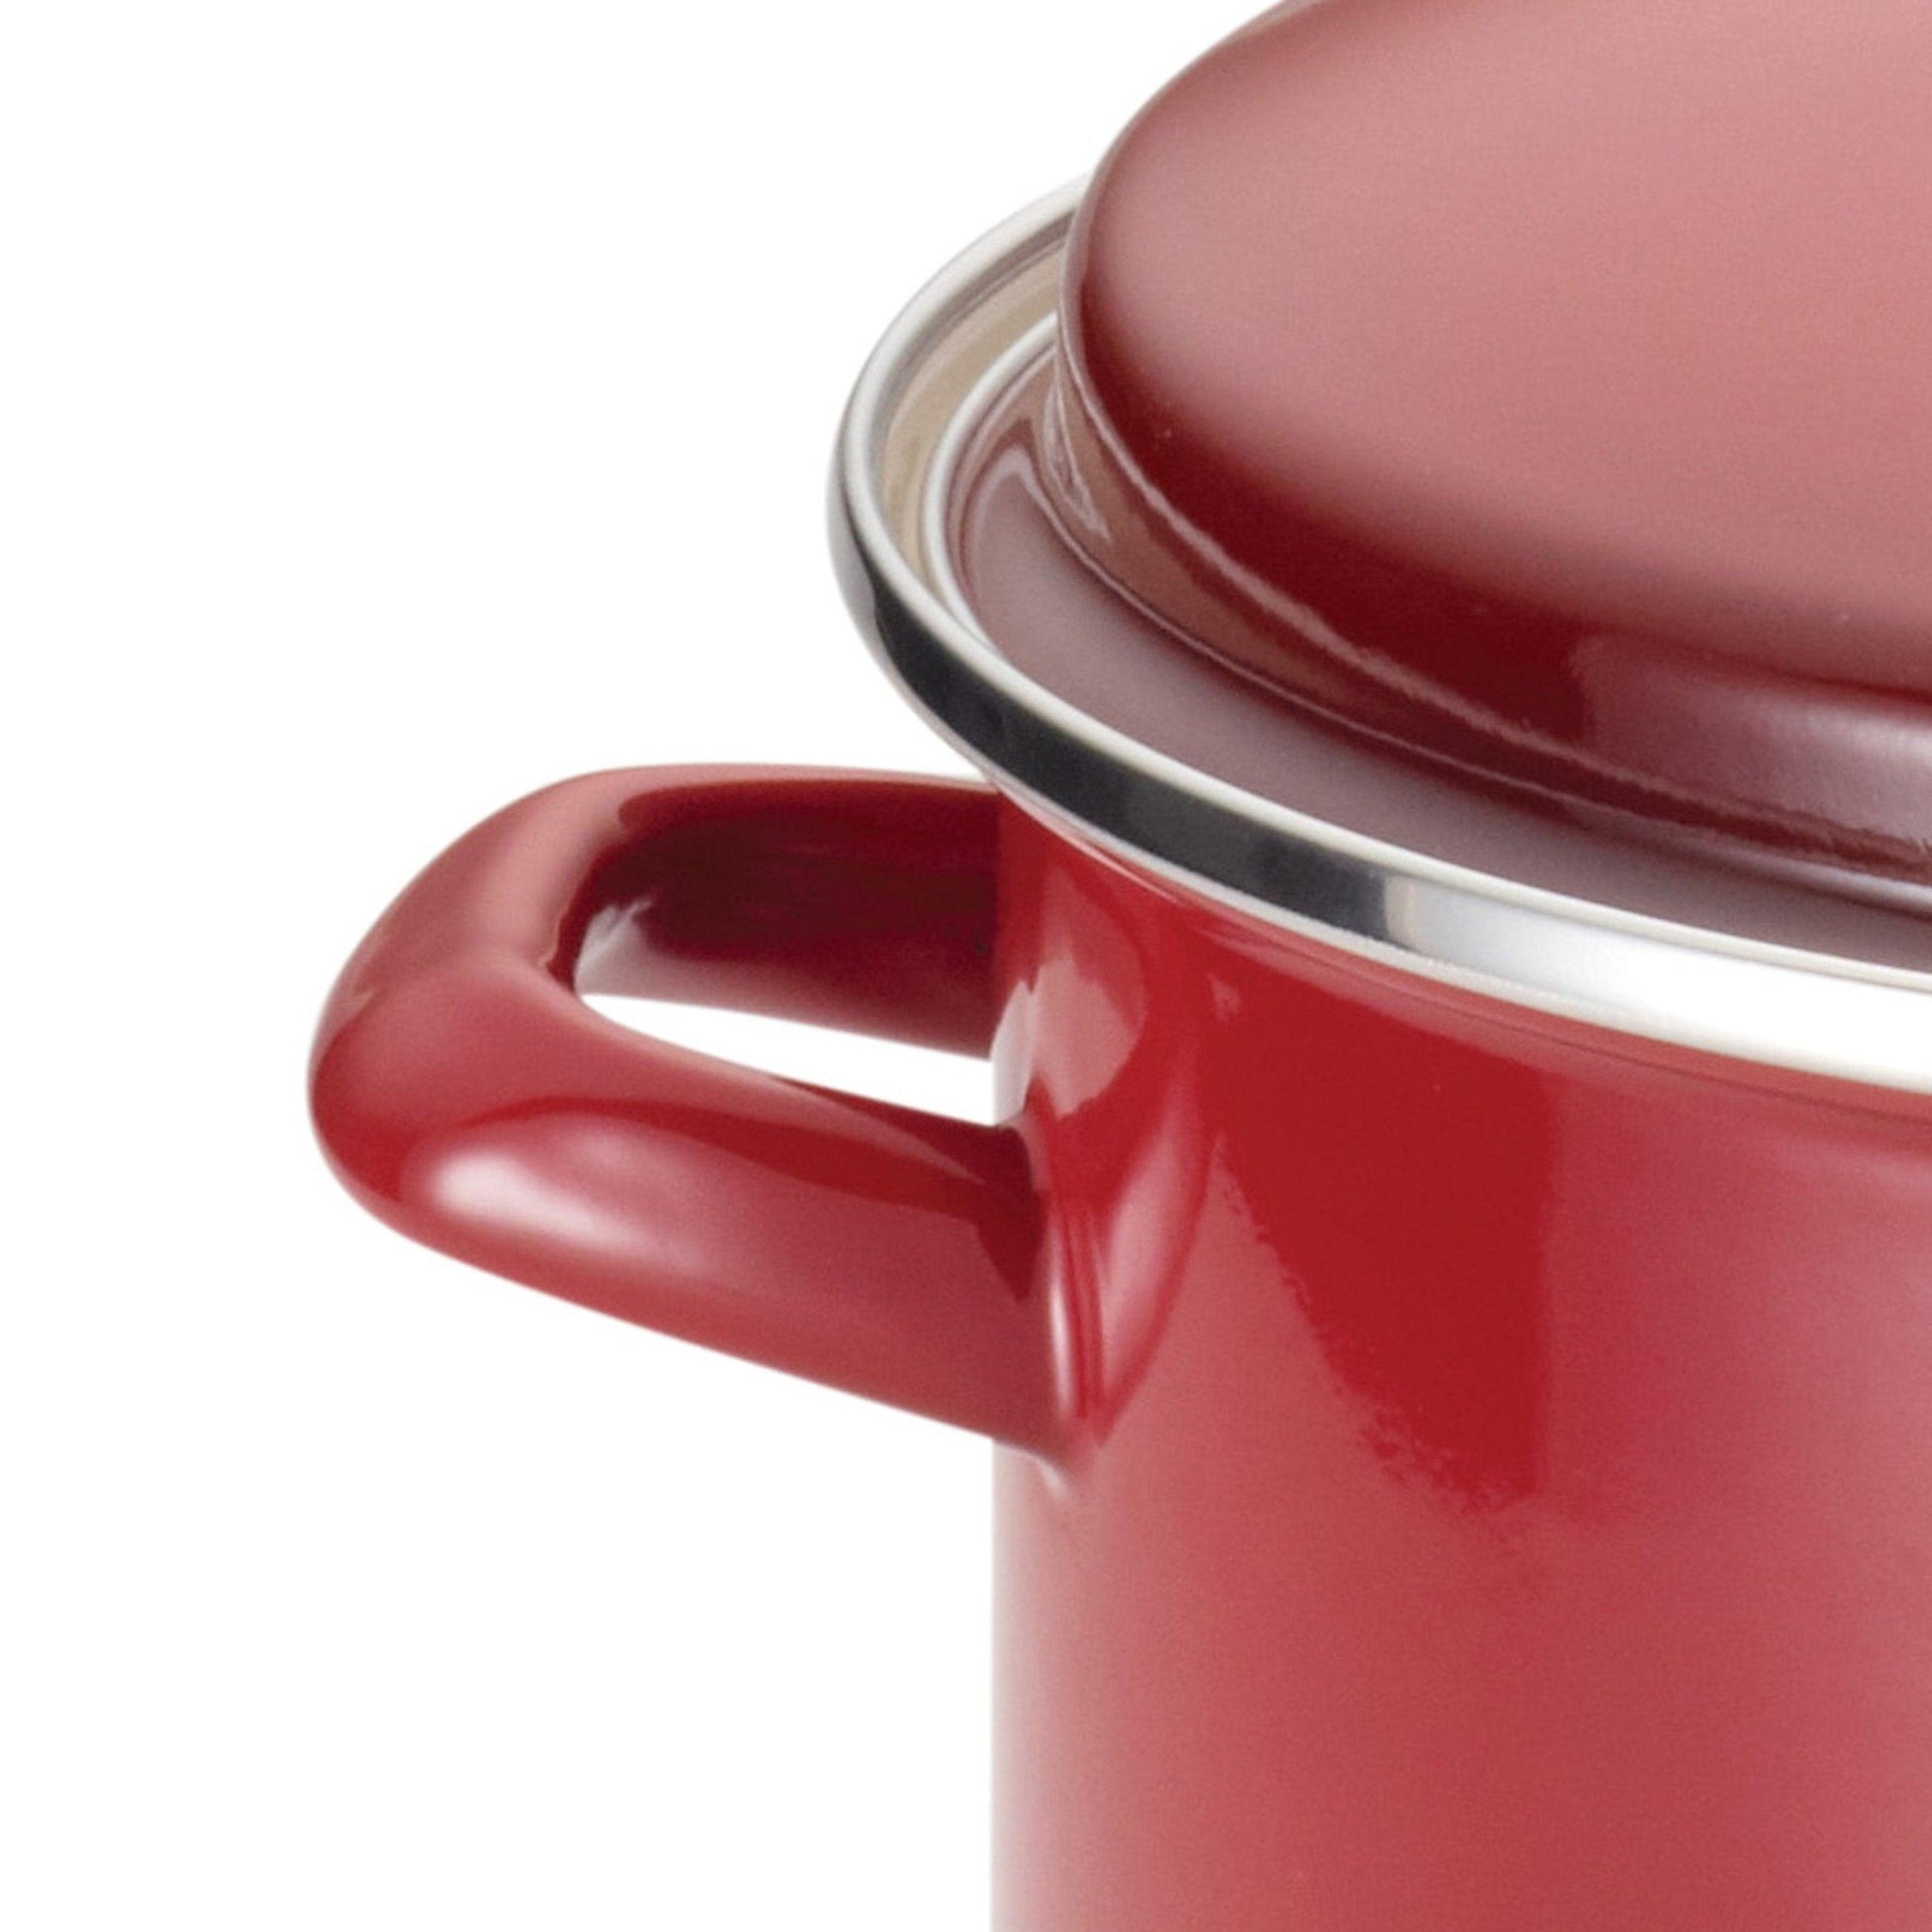 Rachael Ray Enamel on Steel Stock Pot/Stockpot with Lid, 12 Quart, Red Gradient - CookCave